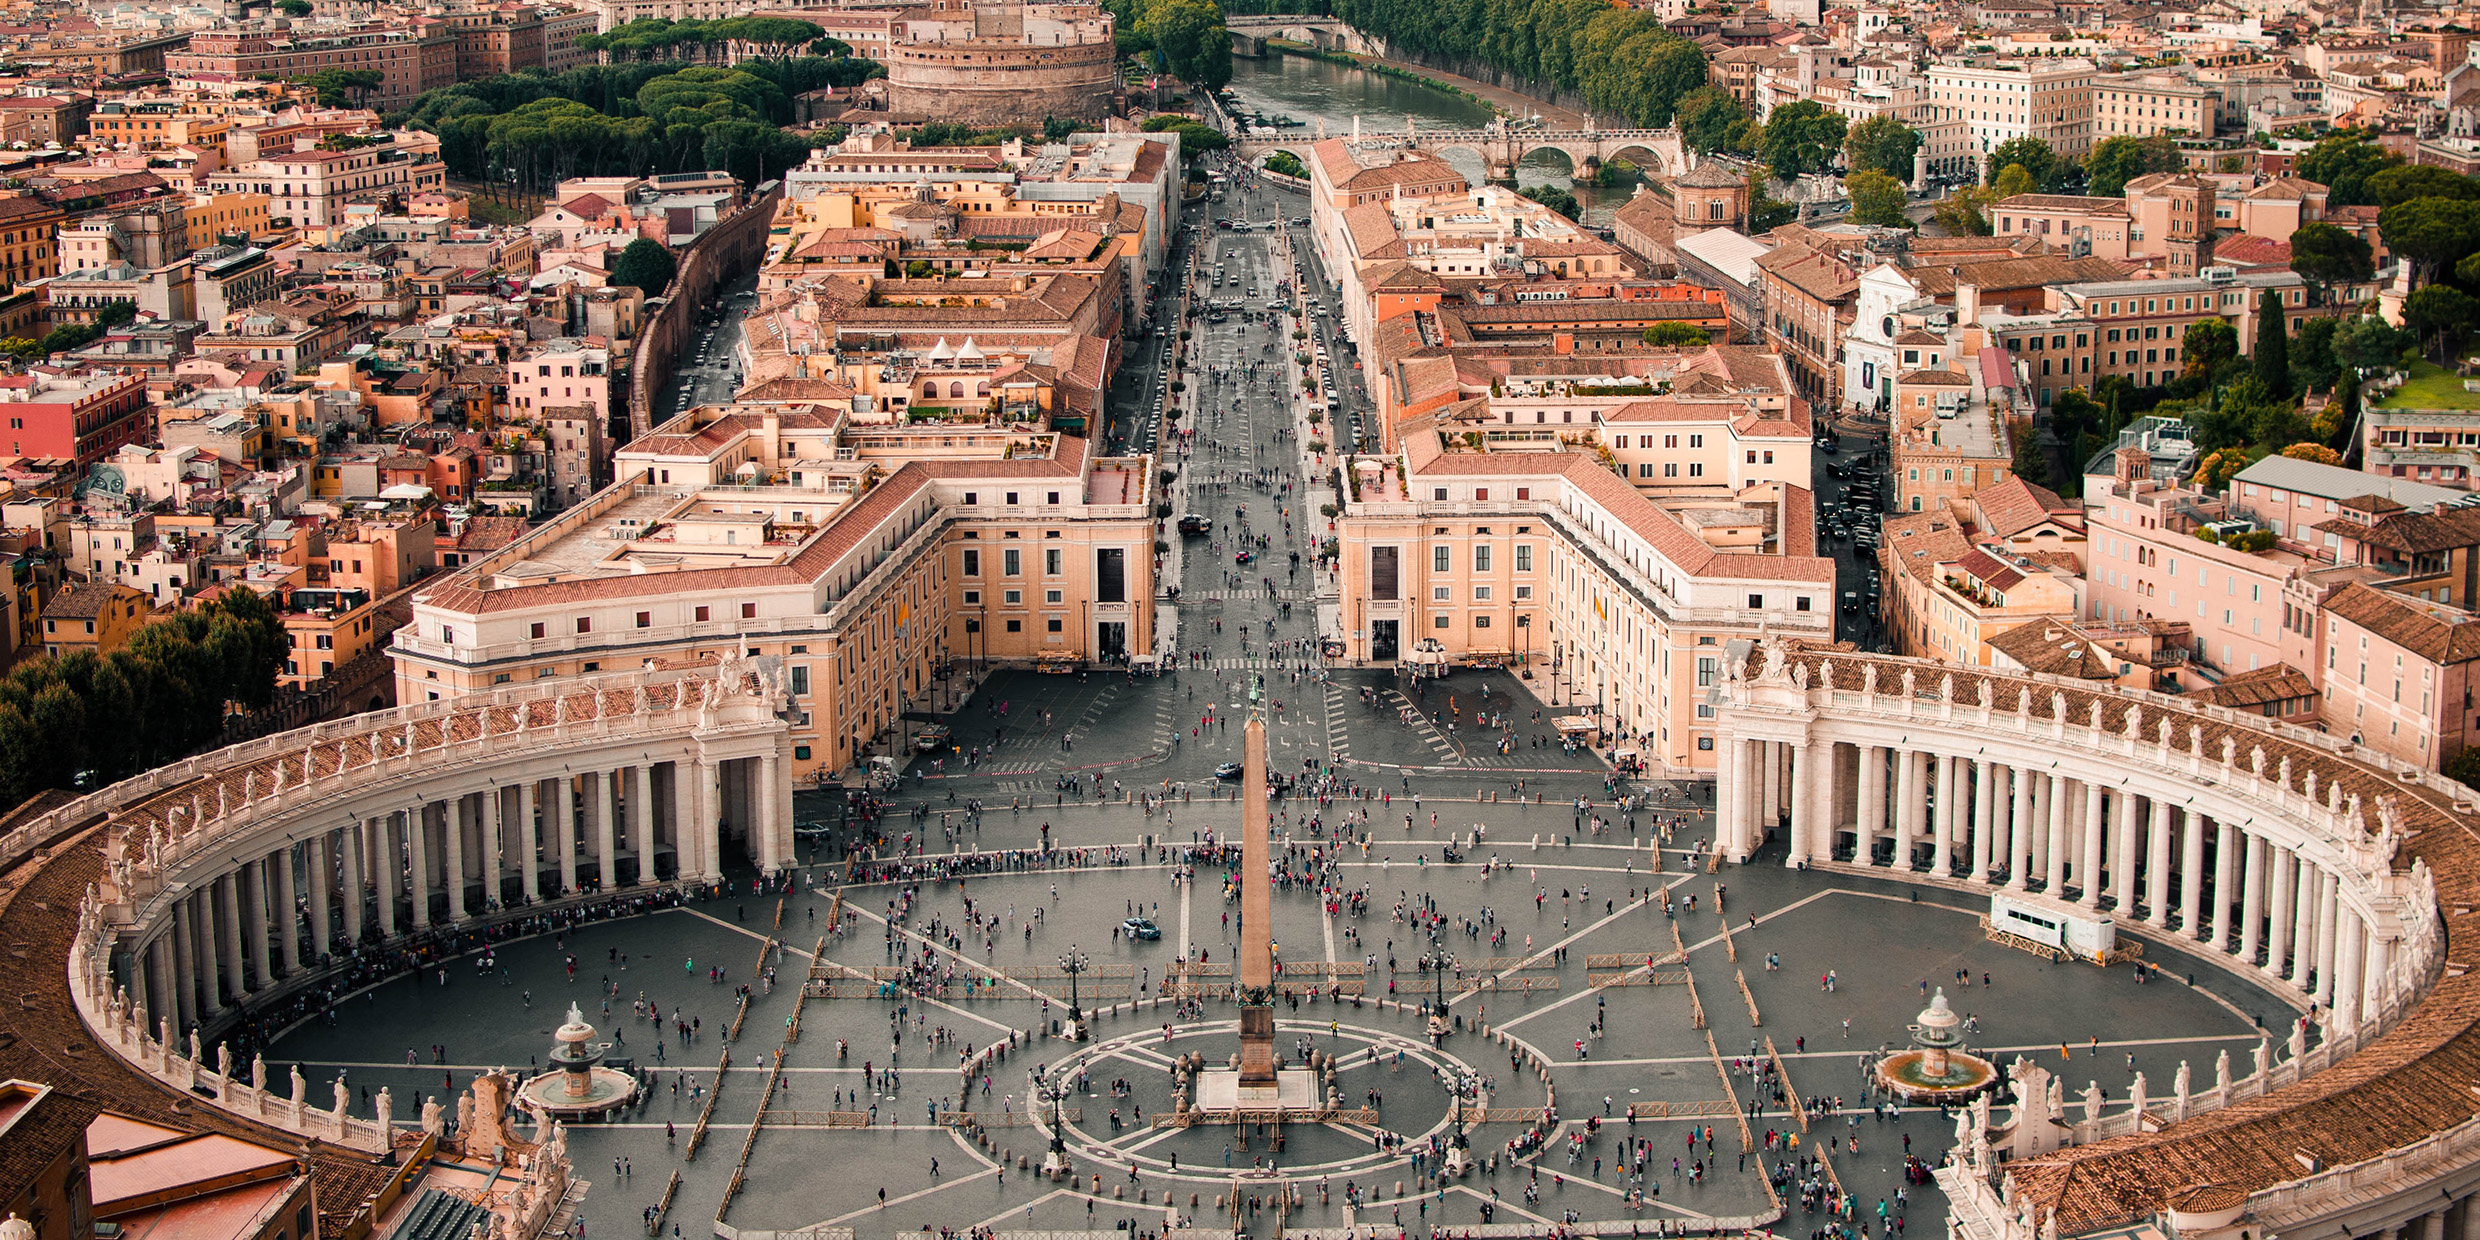 Aerial image of St. Peter's Square at the Vatican